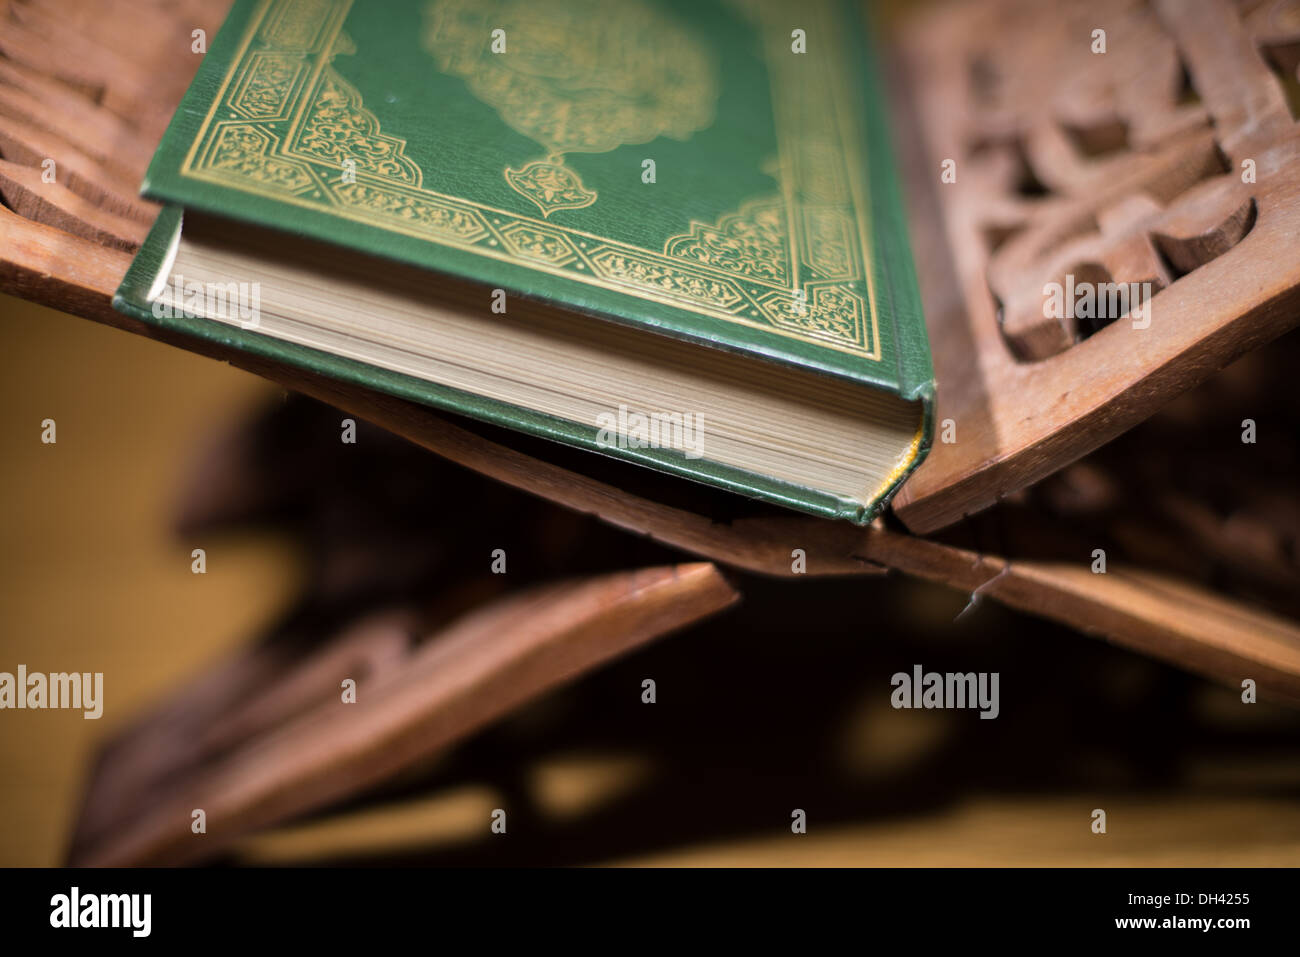 the holy quran book Stock Photo